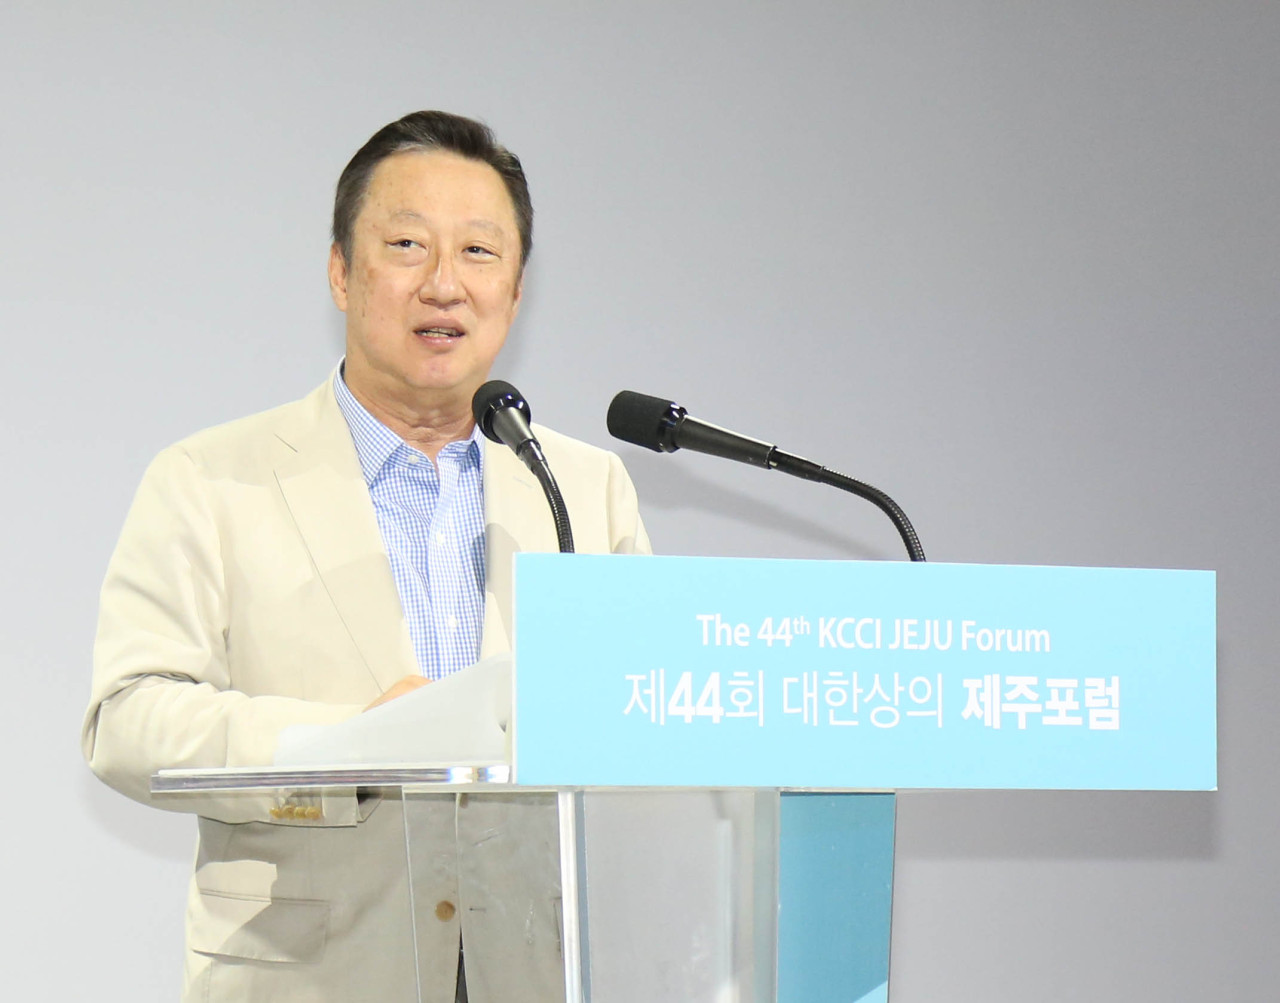 Park Yong-maan, chairman of the Korea Chamber of Commerce and Industry, speaks during the KCCI Jeju Forum in Jeju on Wednesday. (KCCI)